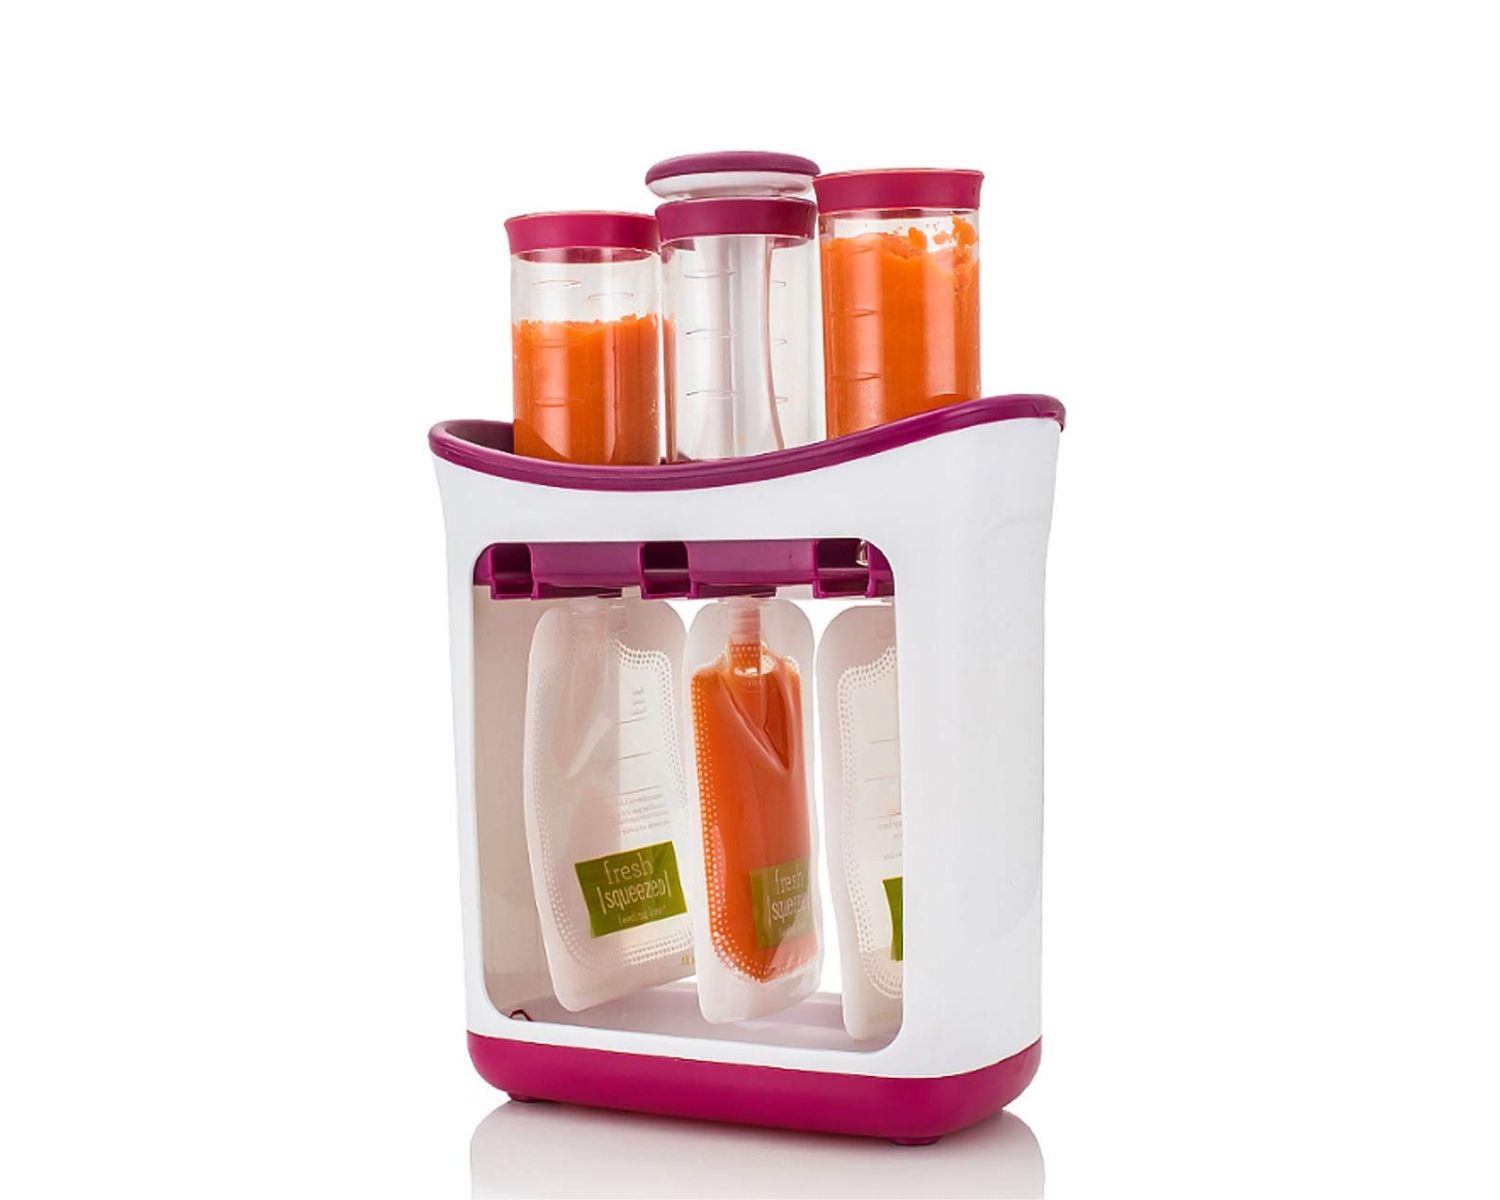 Review: Baby Food Squeeze Station - A Convenient Solution